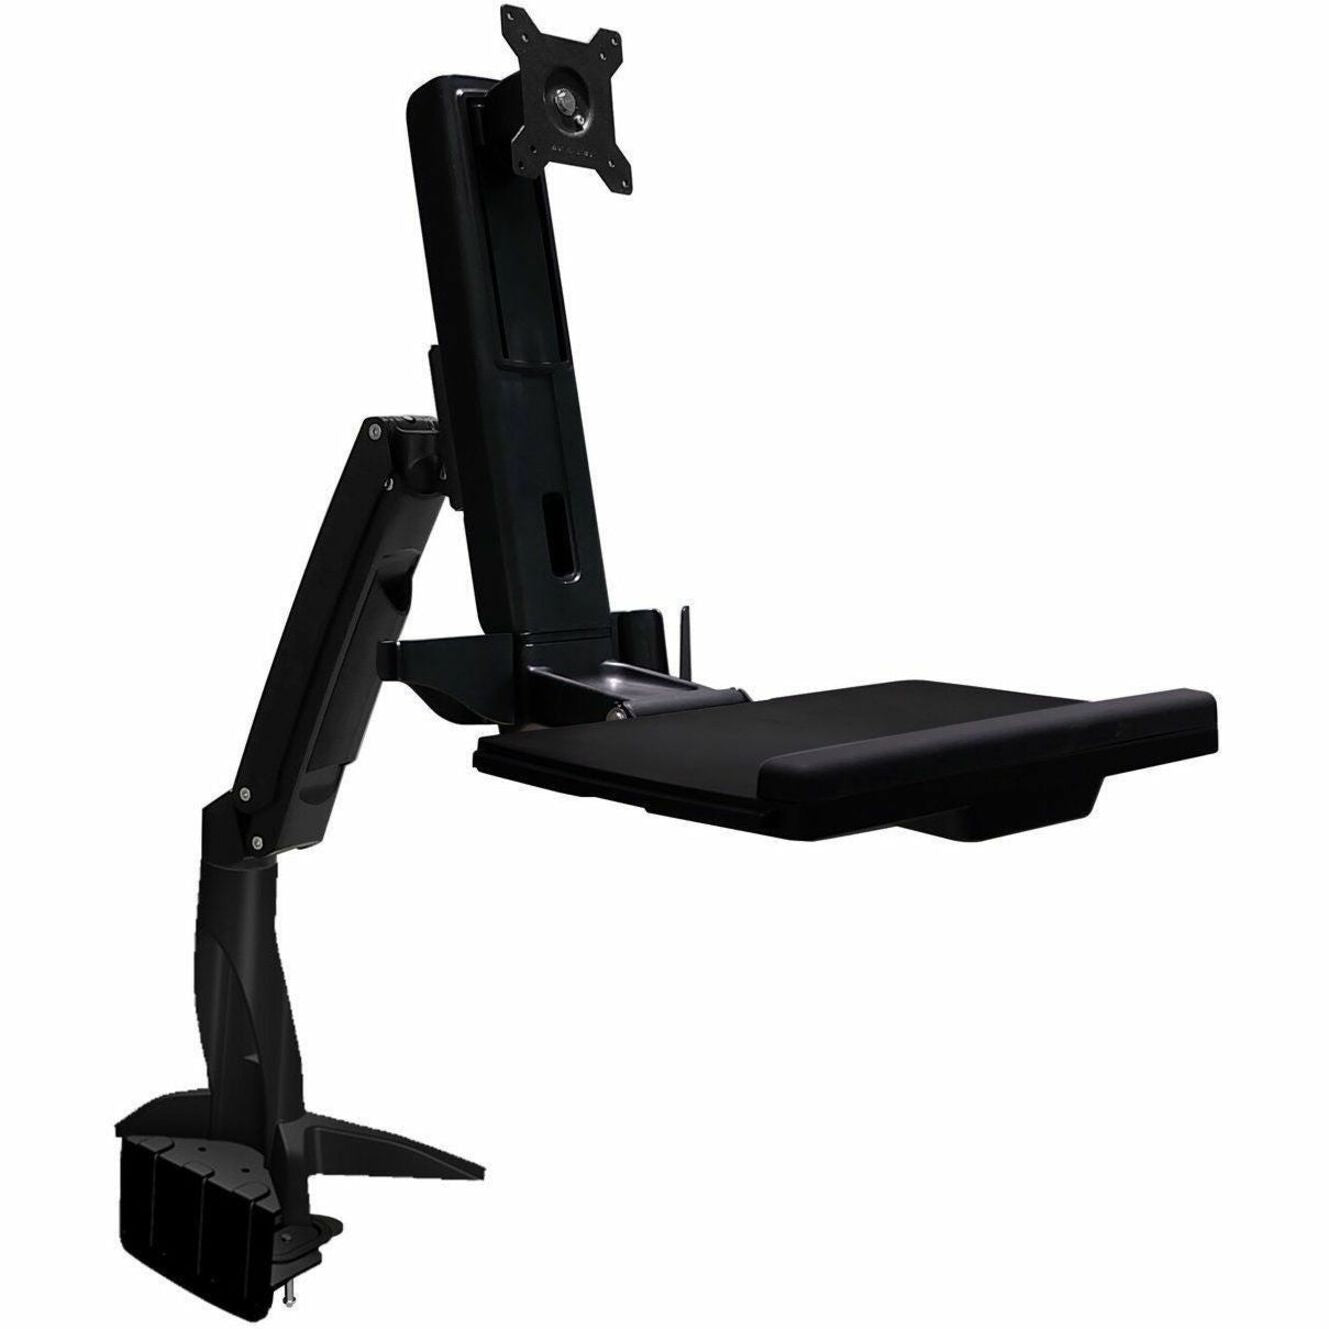 Amer AMR1ACWS Sit-Stand Spring Arm Desk Mount Computer Workstation Combo System, Foldable Keyboard Tray, Retractable Mouse Pad, 24" Monitor Support